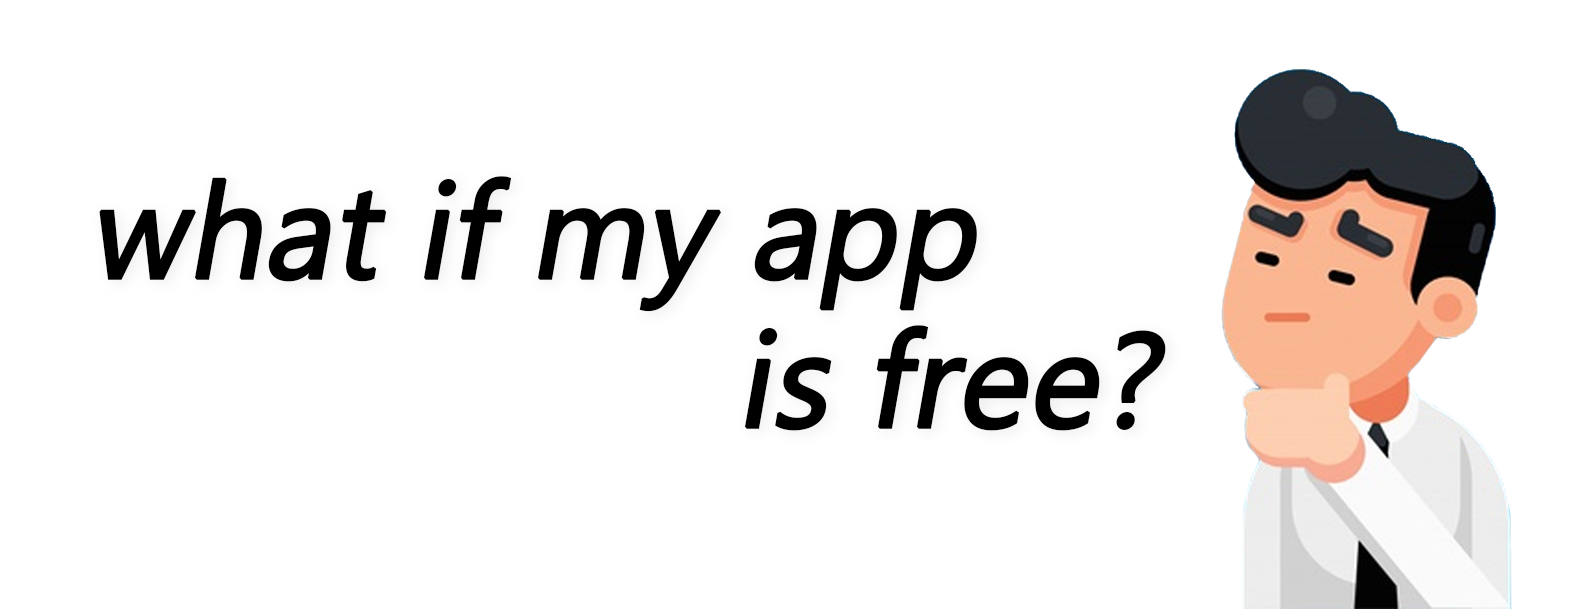 Shopify App Development - What if my app is free?